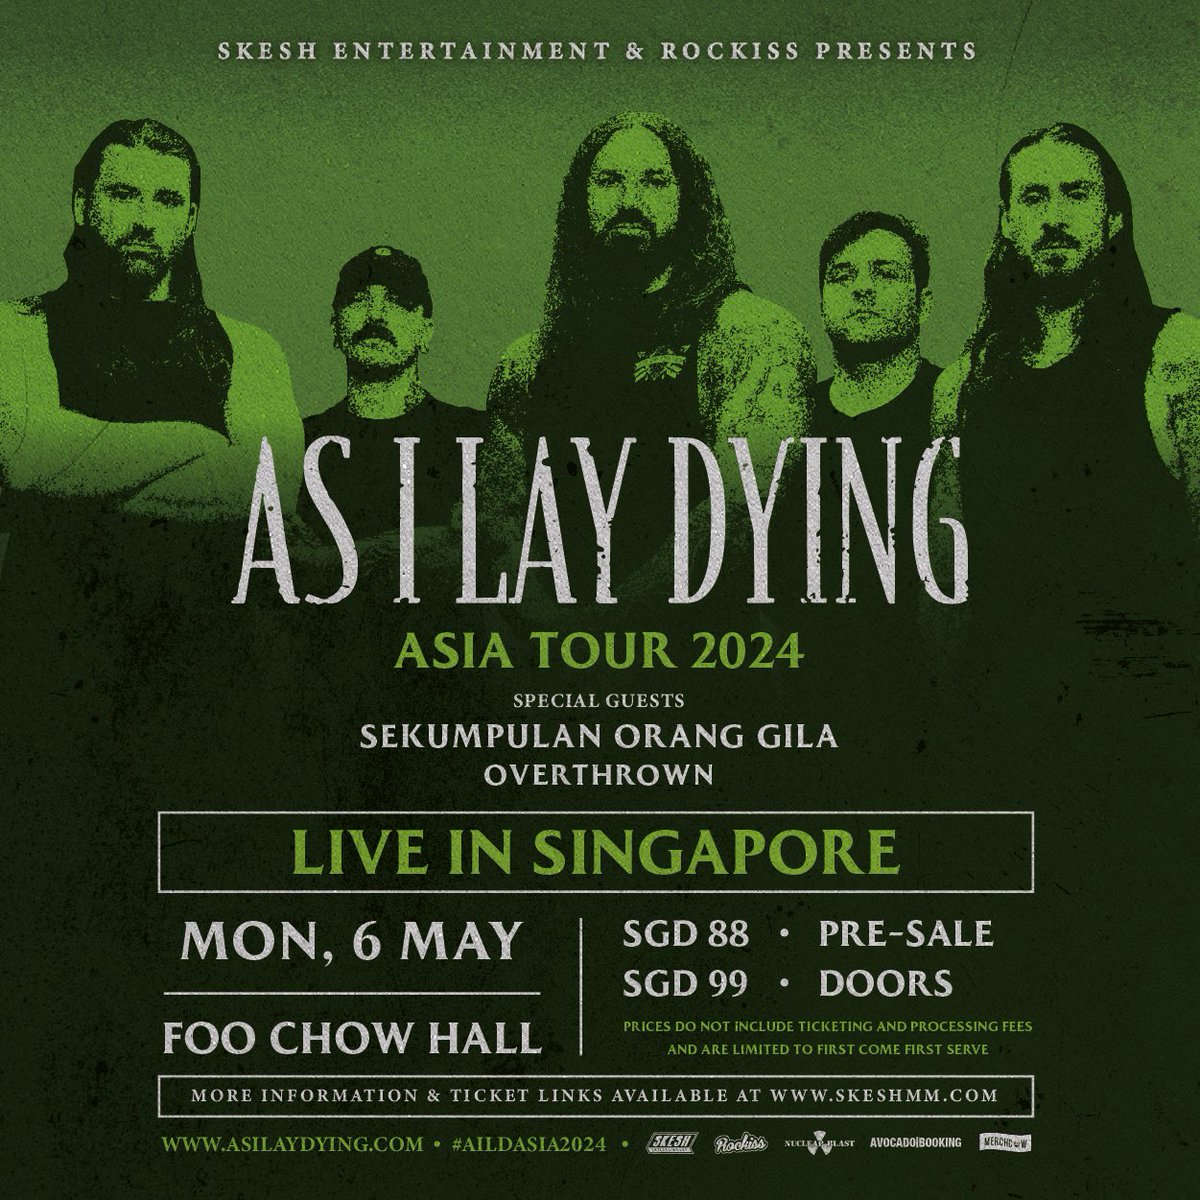 Singapore! Don't miss out on @ASILAYDYINGBAND hitting your shores this 6th May! Excited to have @weareSOG and @overthrownhc joining the show! #AILDAsia2024 #AsILayDying #SkeshEntertainment